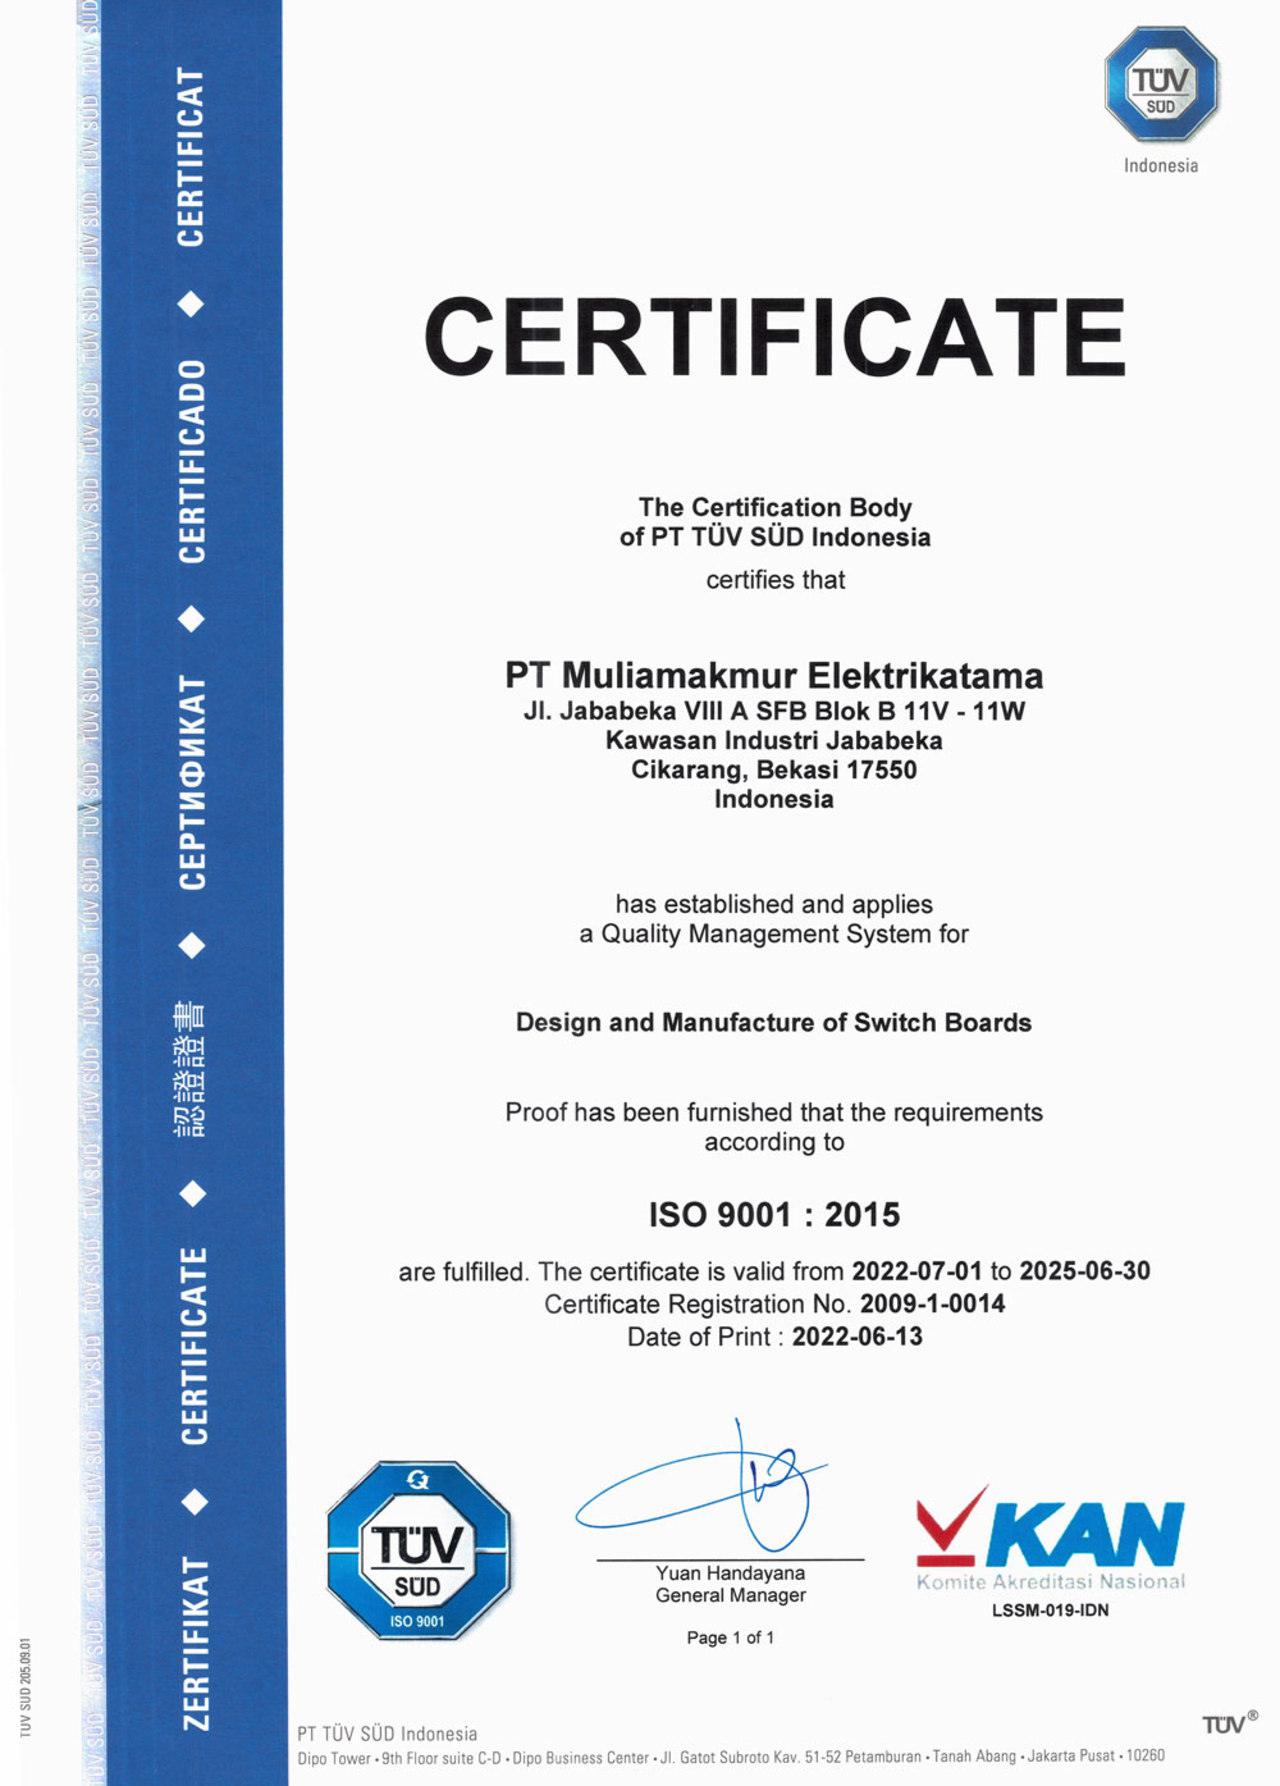 Certificate ISO 9001 2015 MME